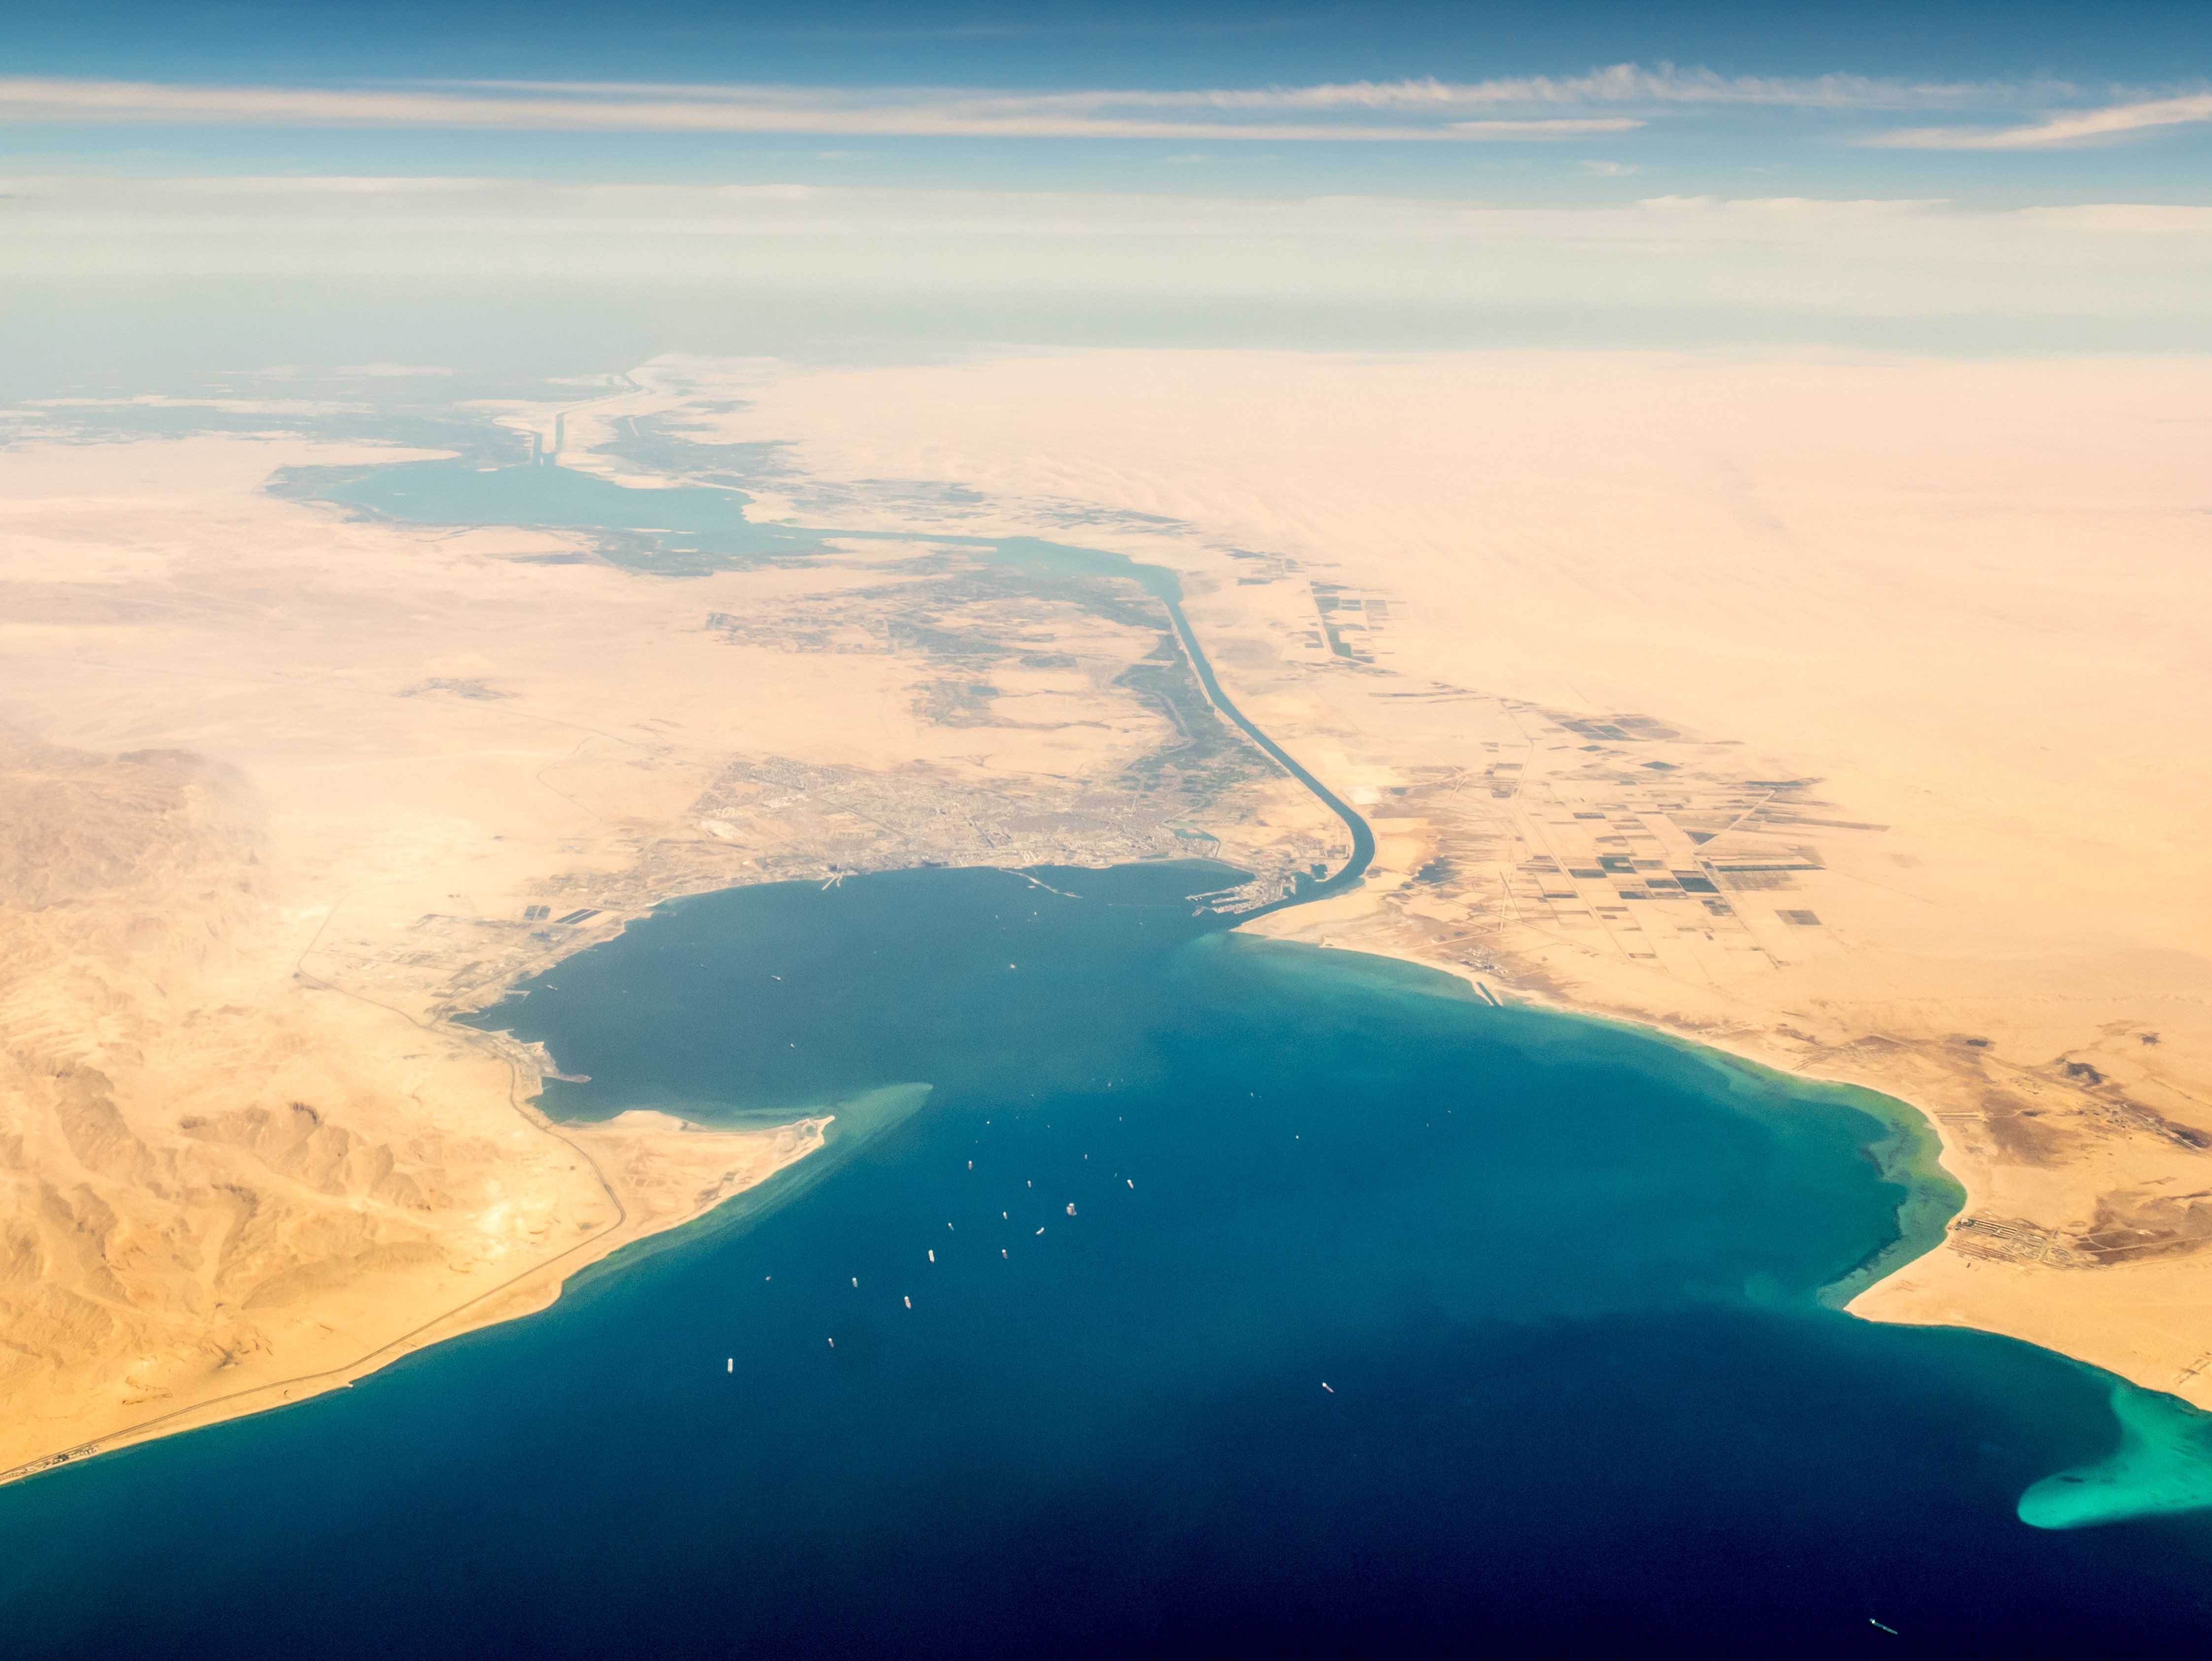 Suez Canal, leading to the Red Sea, with commercial vessels